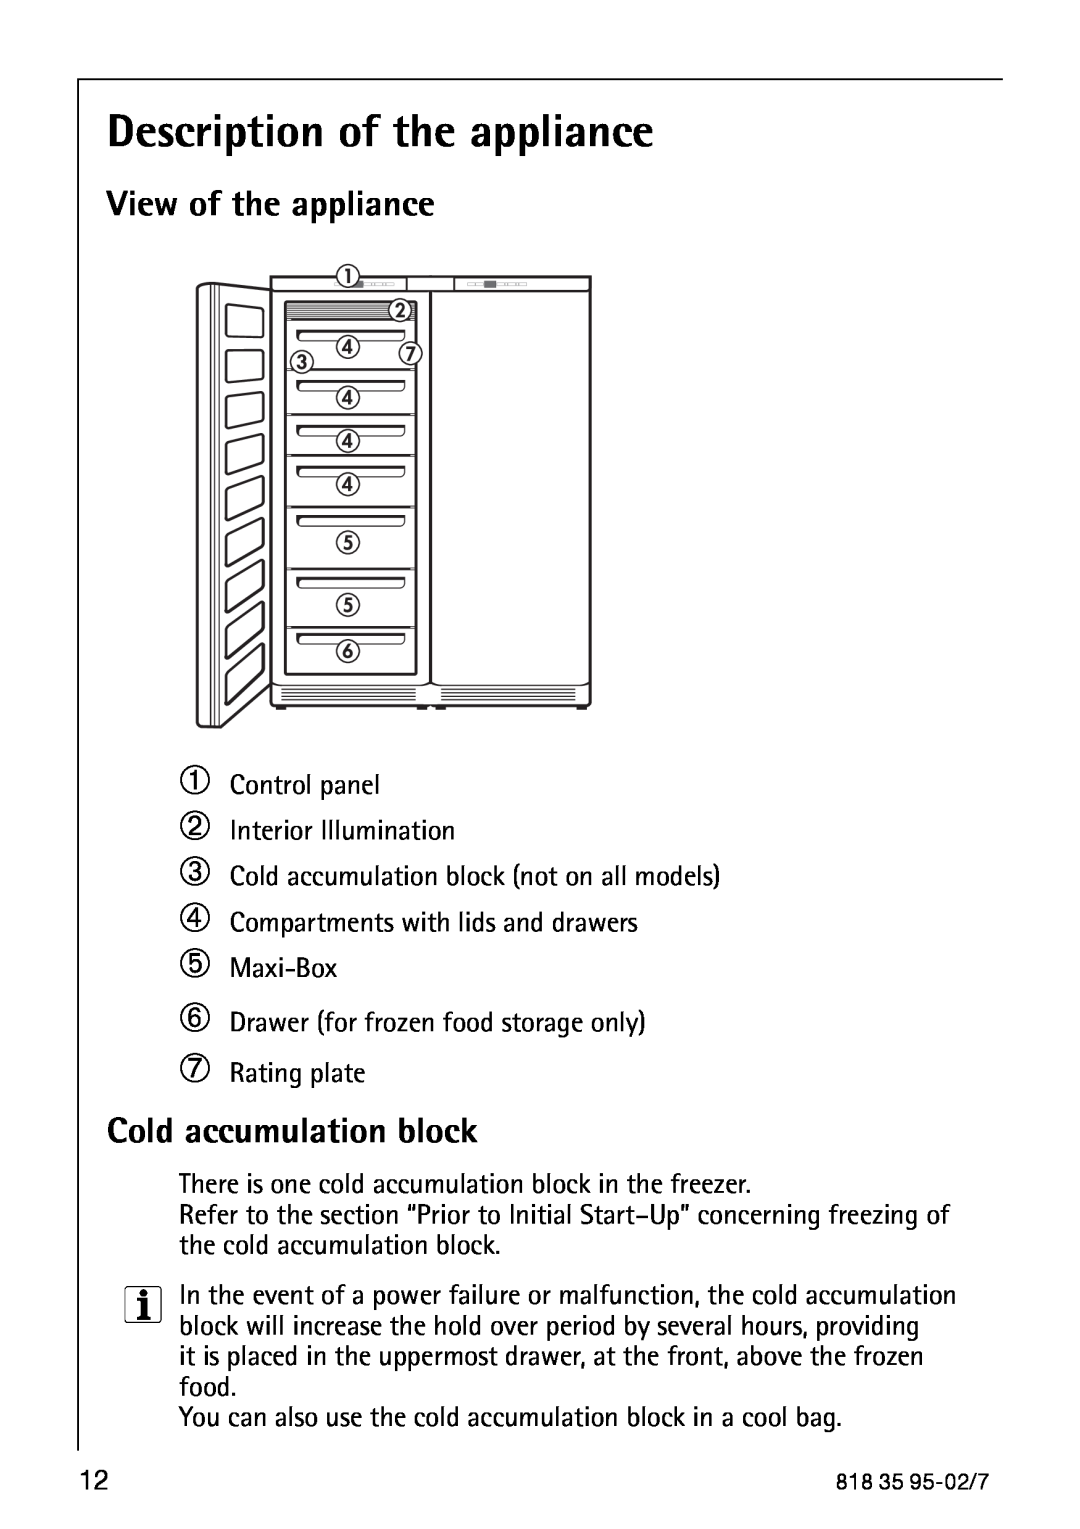 AEG 75248 GA3 manual Description of the appliance, View of the appliance, Cold accumulation block 